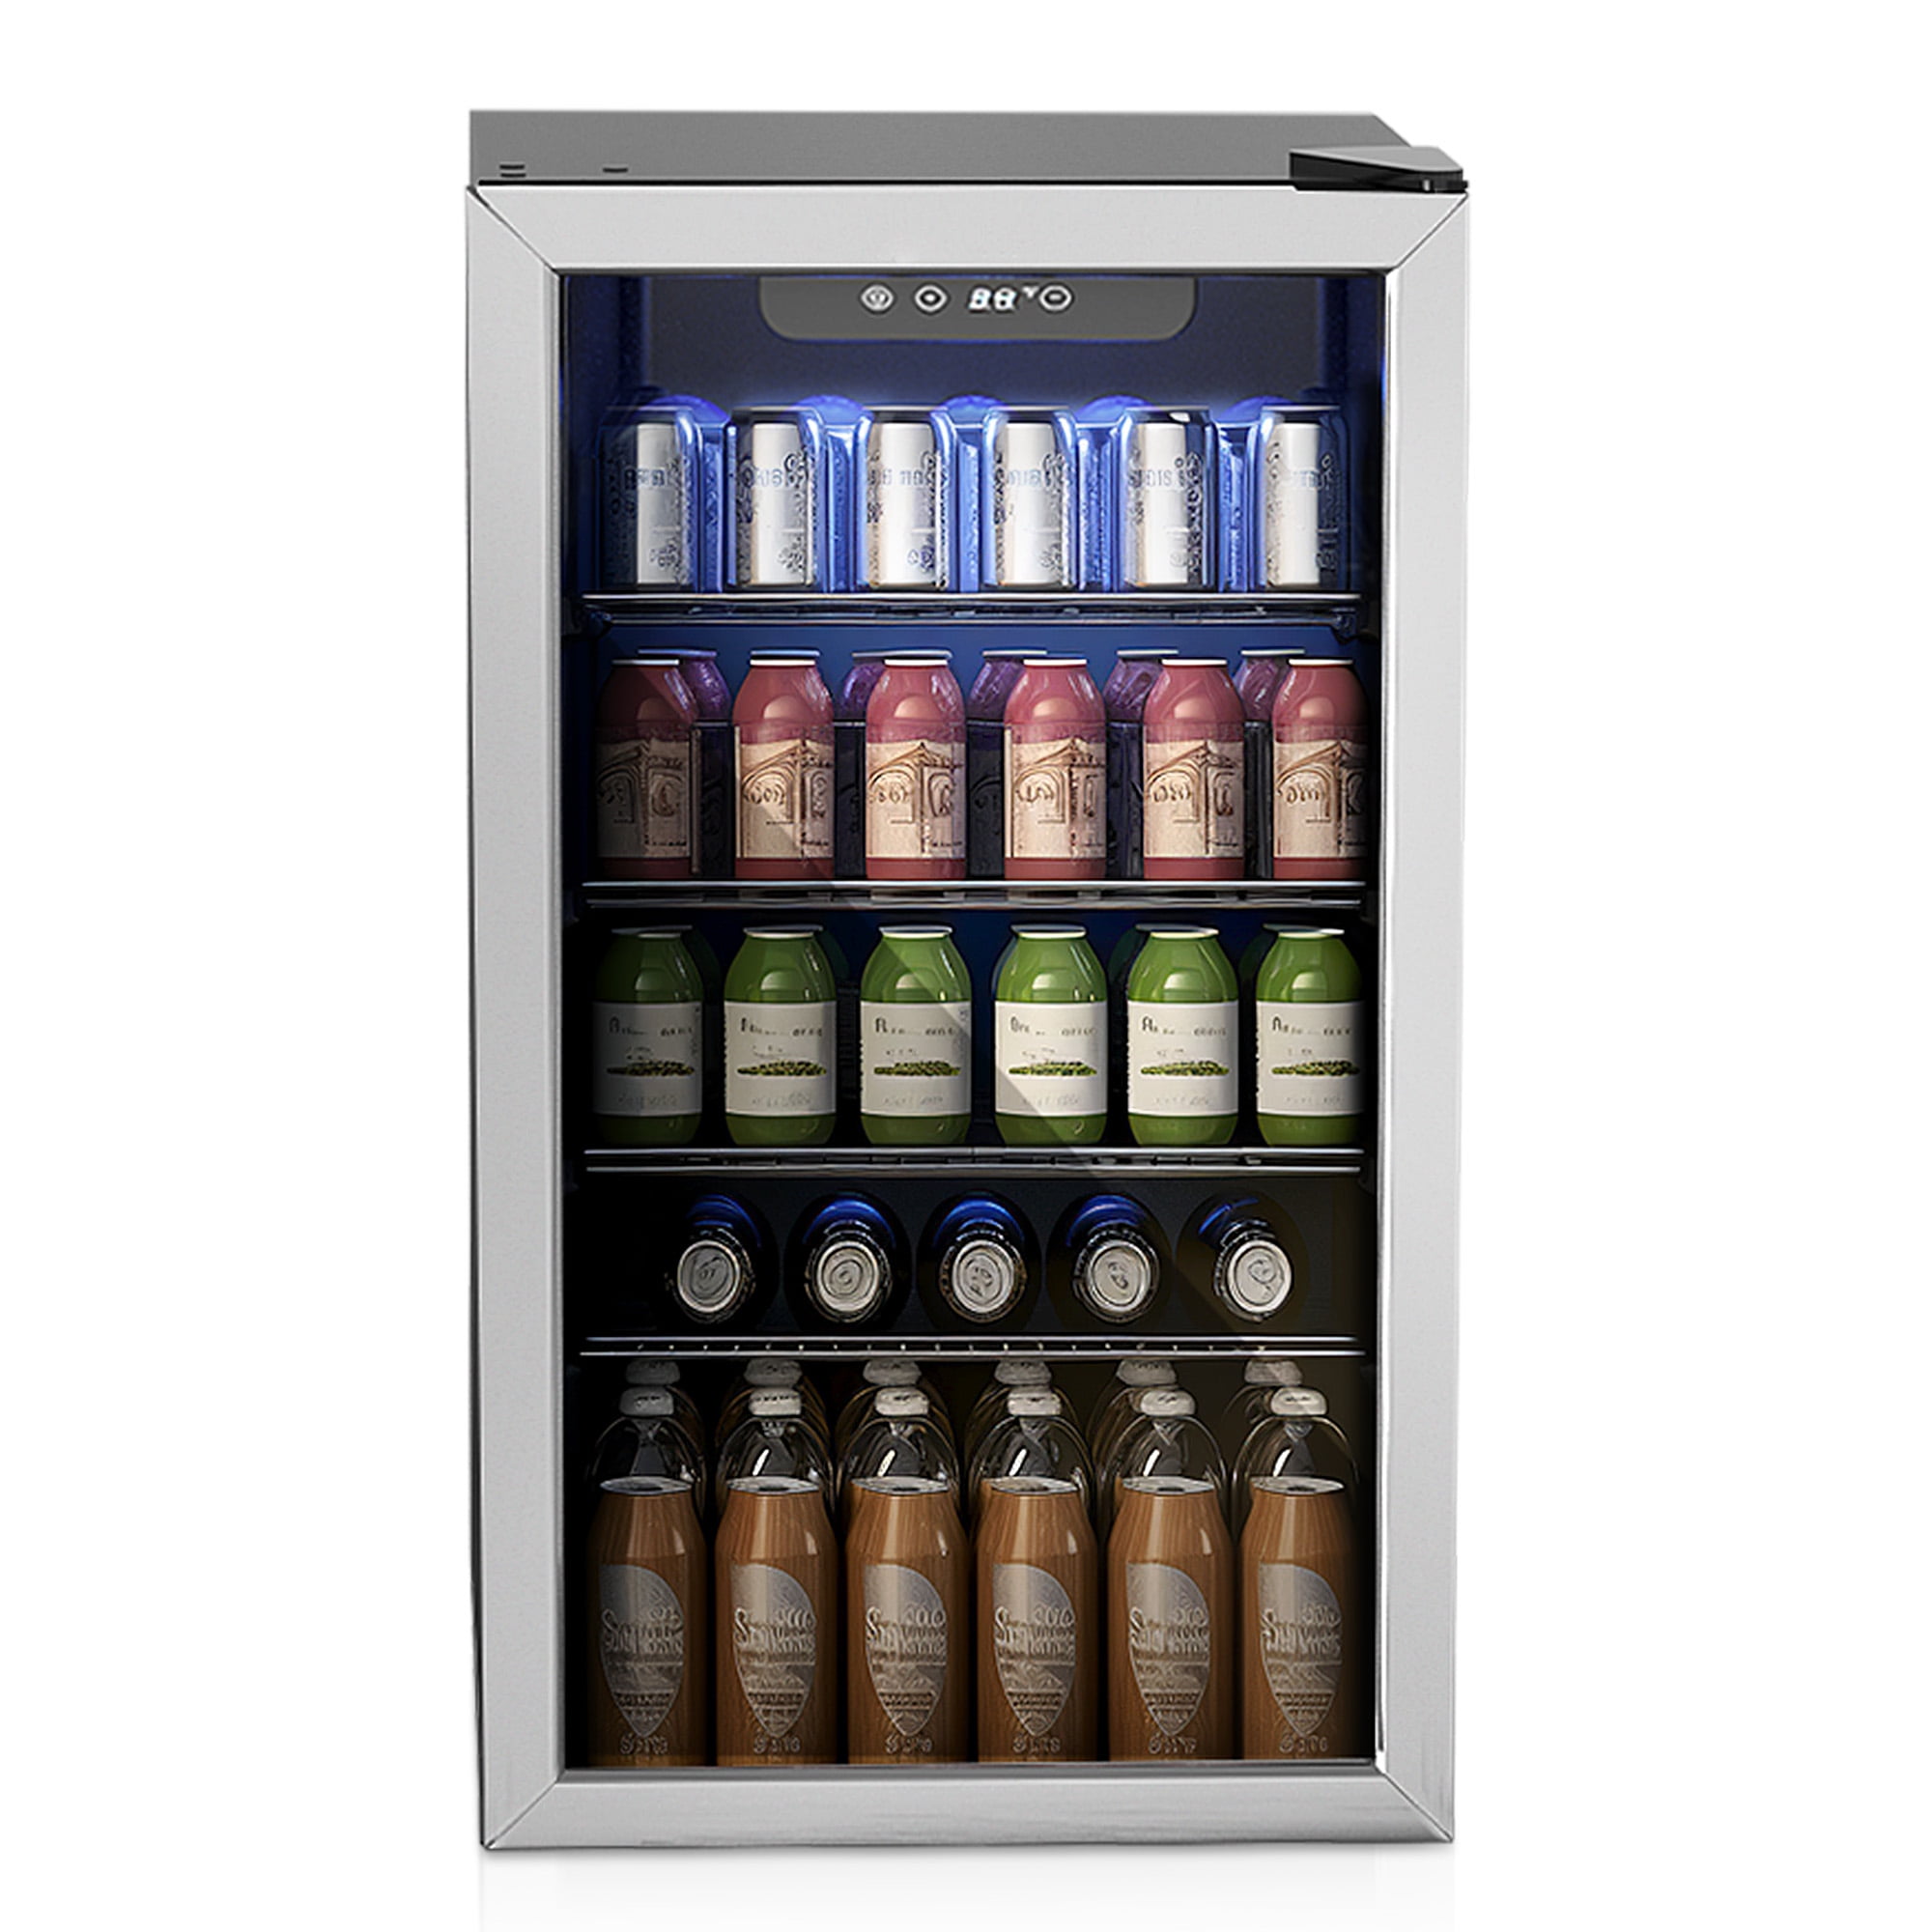 EUHOMY Beverage Refrigerator and Cooler, 126 Can Mini fridge with Glass  Door, Small Refrigerator with Adjustable Shelves for Soda Beer or Wine,  Perfect for Home/Bar/Office (Slive). - Coupon Codes, Promo Codes, Daily